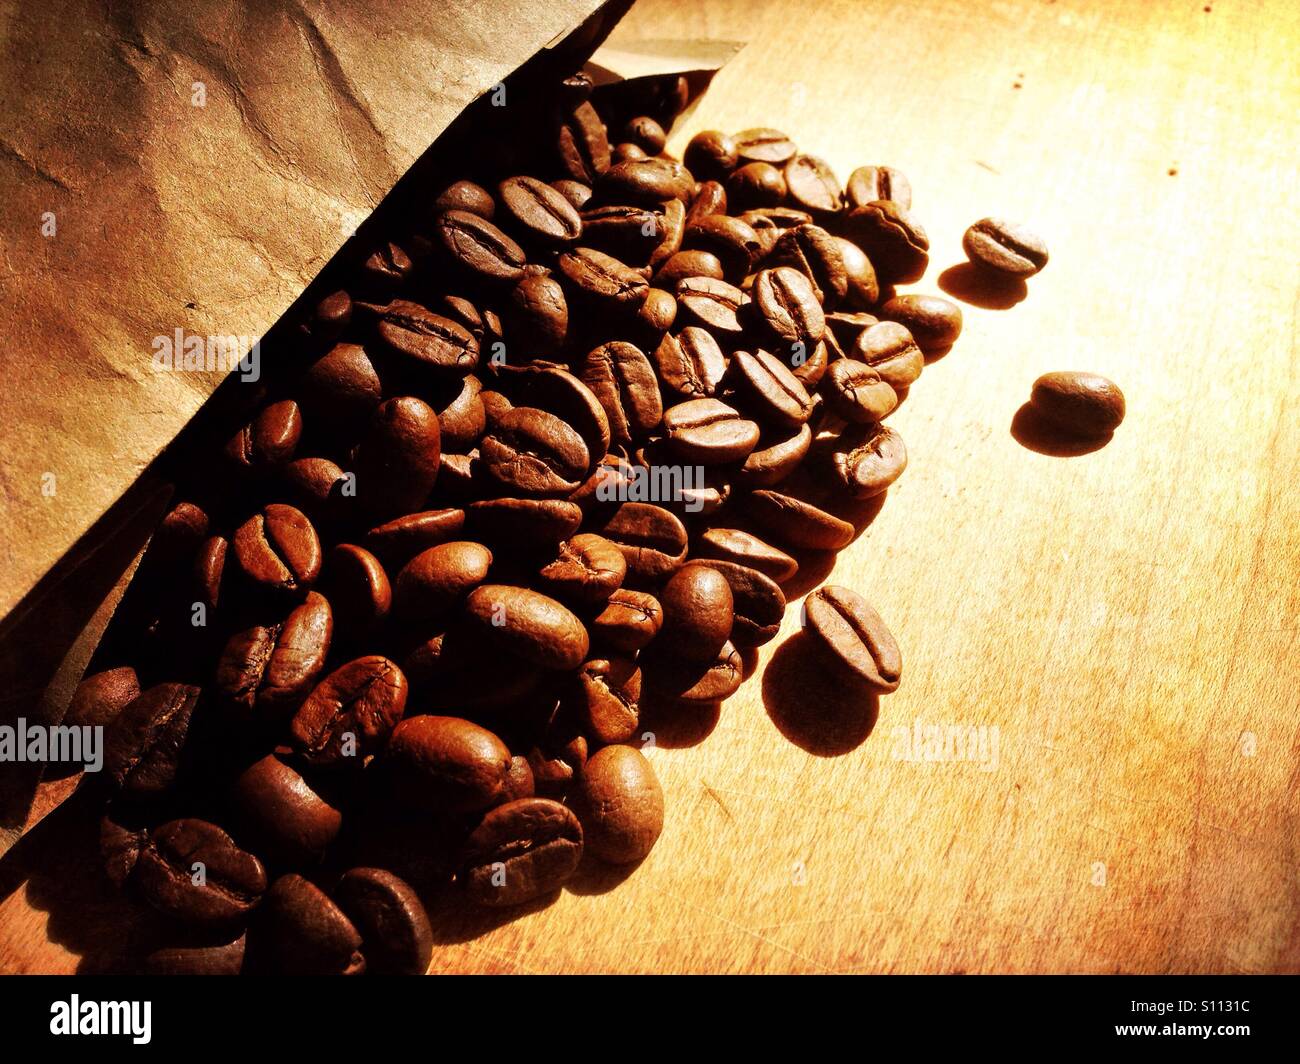 Monsoon washed arabica coffee beans spilled onto a wooden surface from a brown paper back Stock Photo